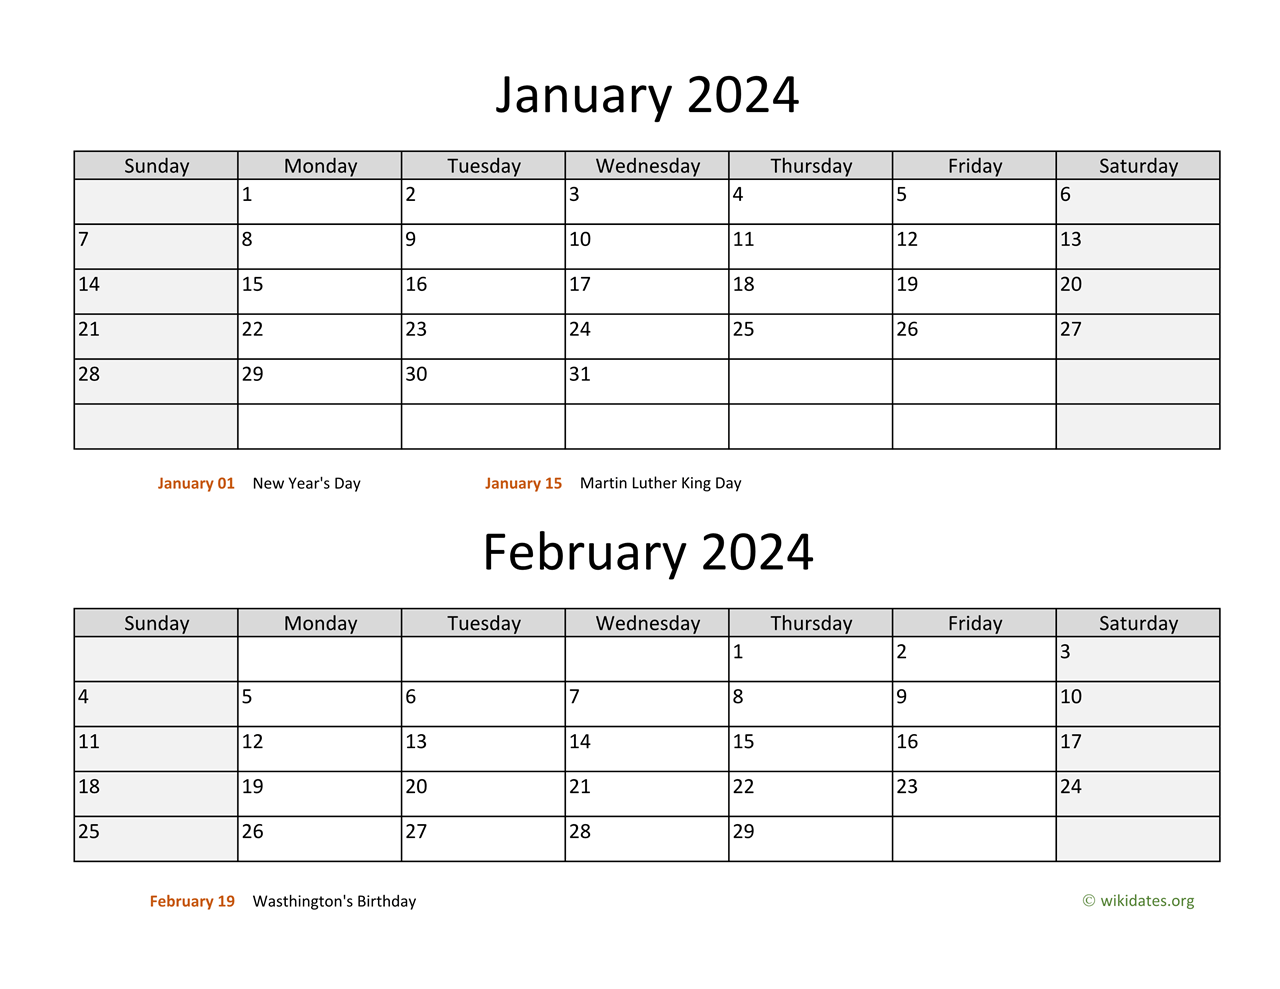 January And February 2024 Calendar | Wikidates for January And February 2024 Calendar Free Printable